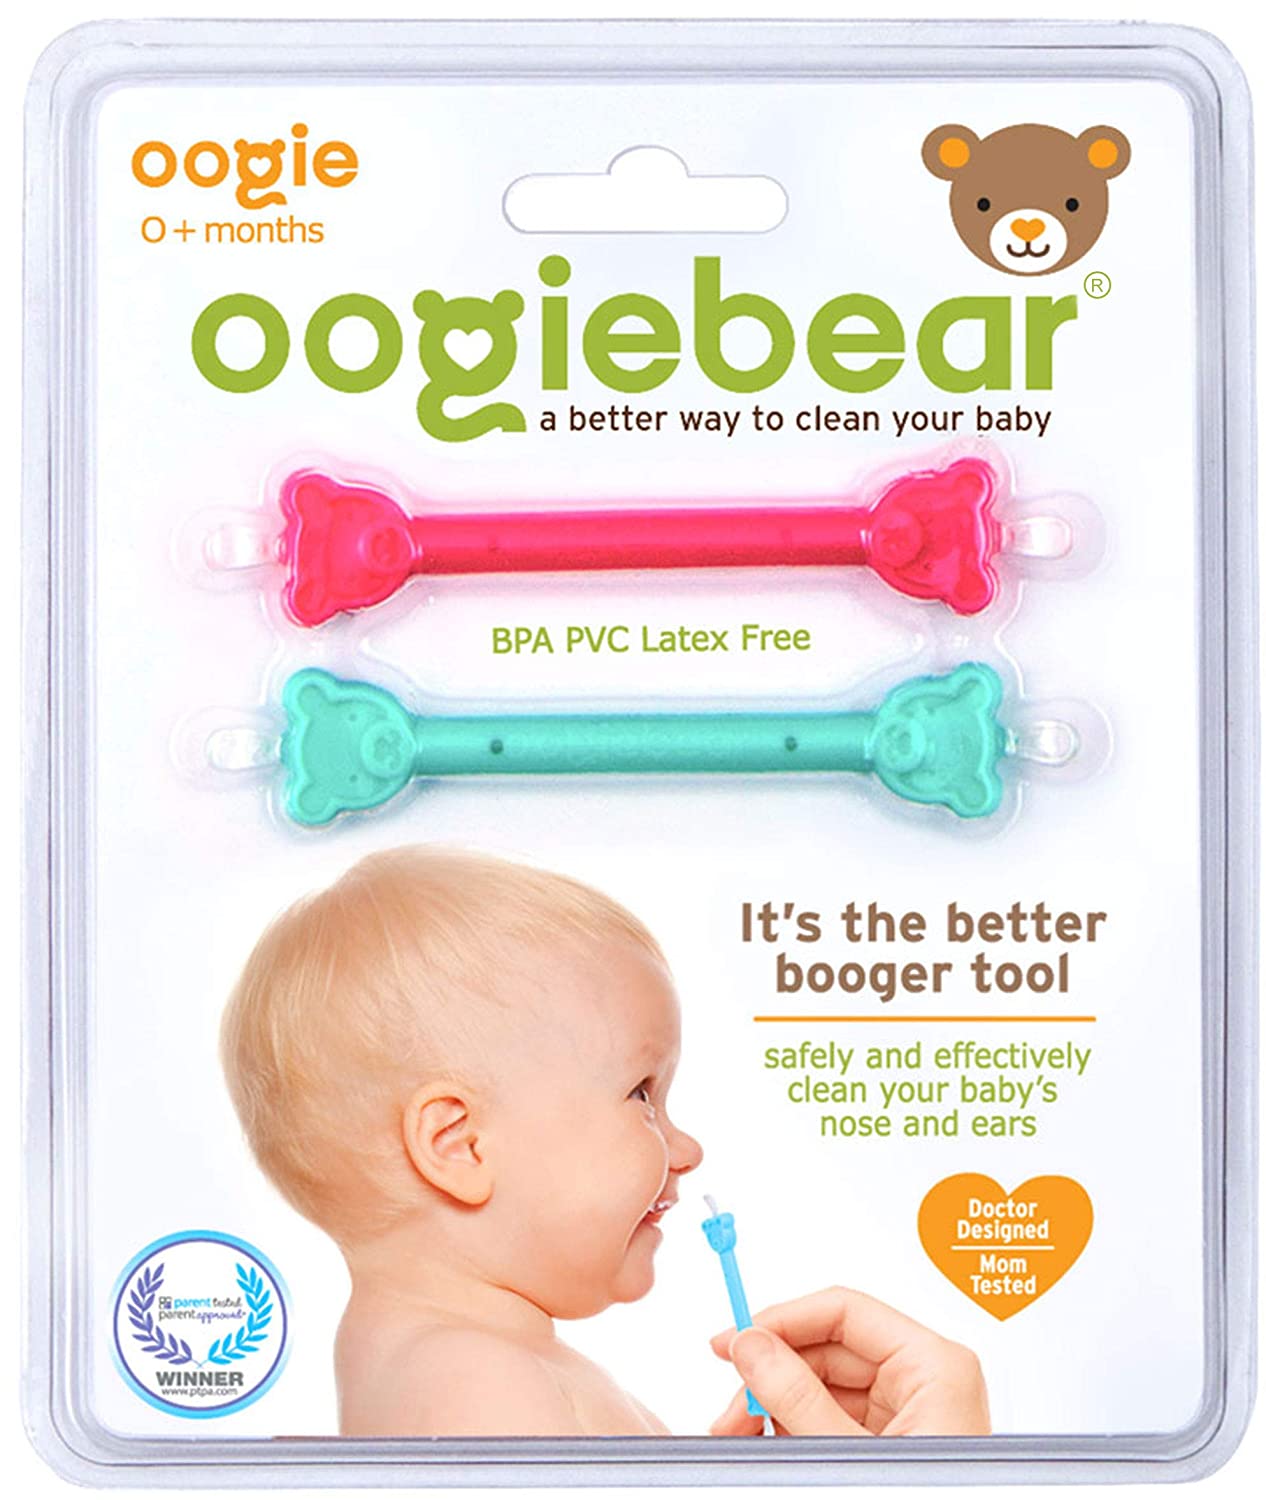 Is the oogiebear worth it? - May 2020 Babies, Forums